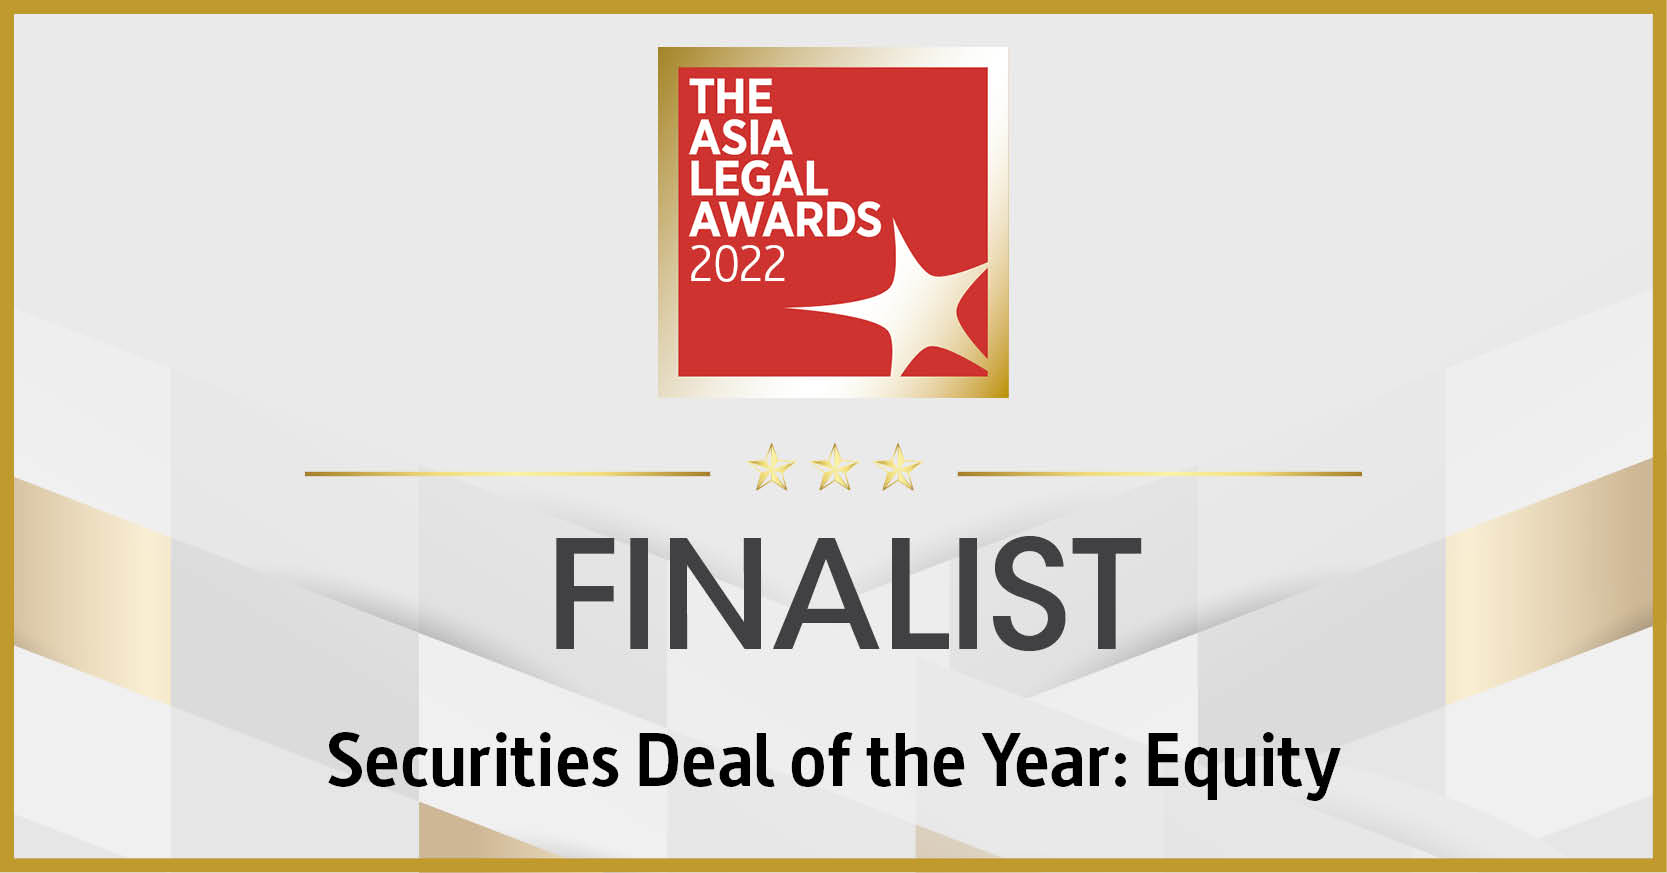 LC Lawyers has been shortlisted for a “Finalist” for Securities Deal of the Year: Equity at The Asia Legal Awards Deal Awards of the Year 2022.